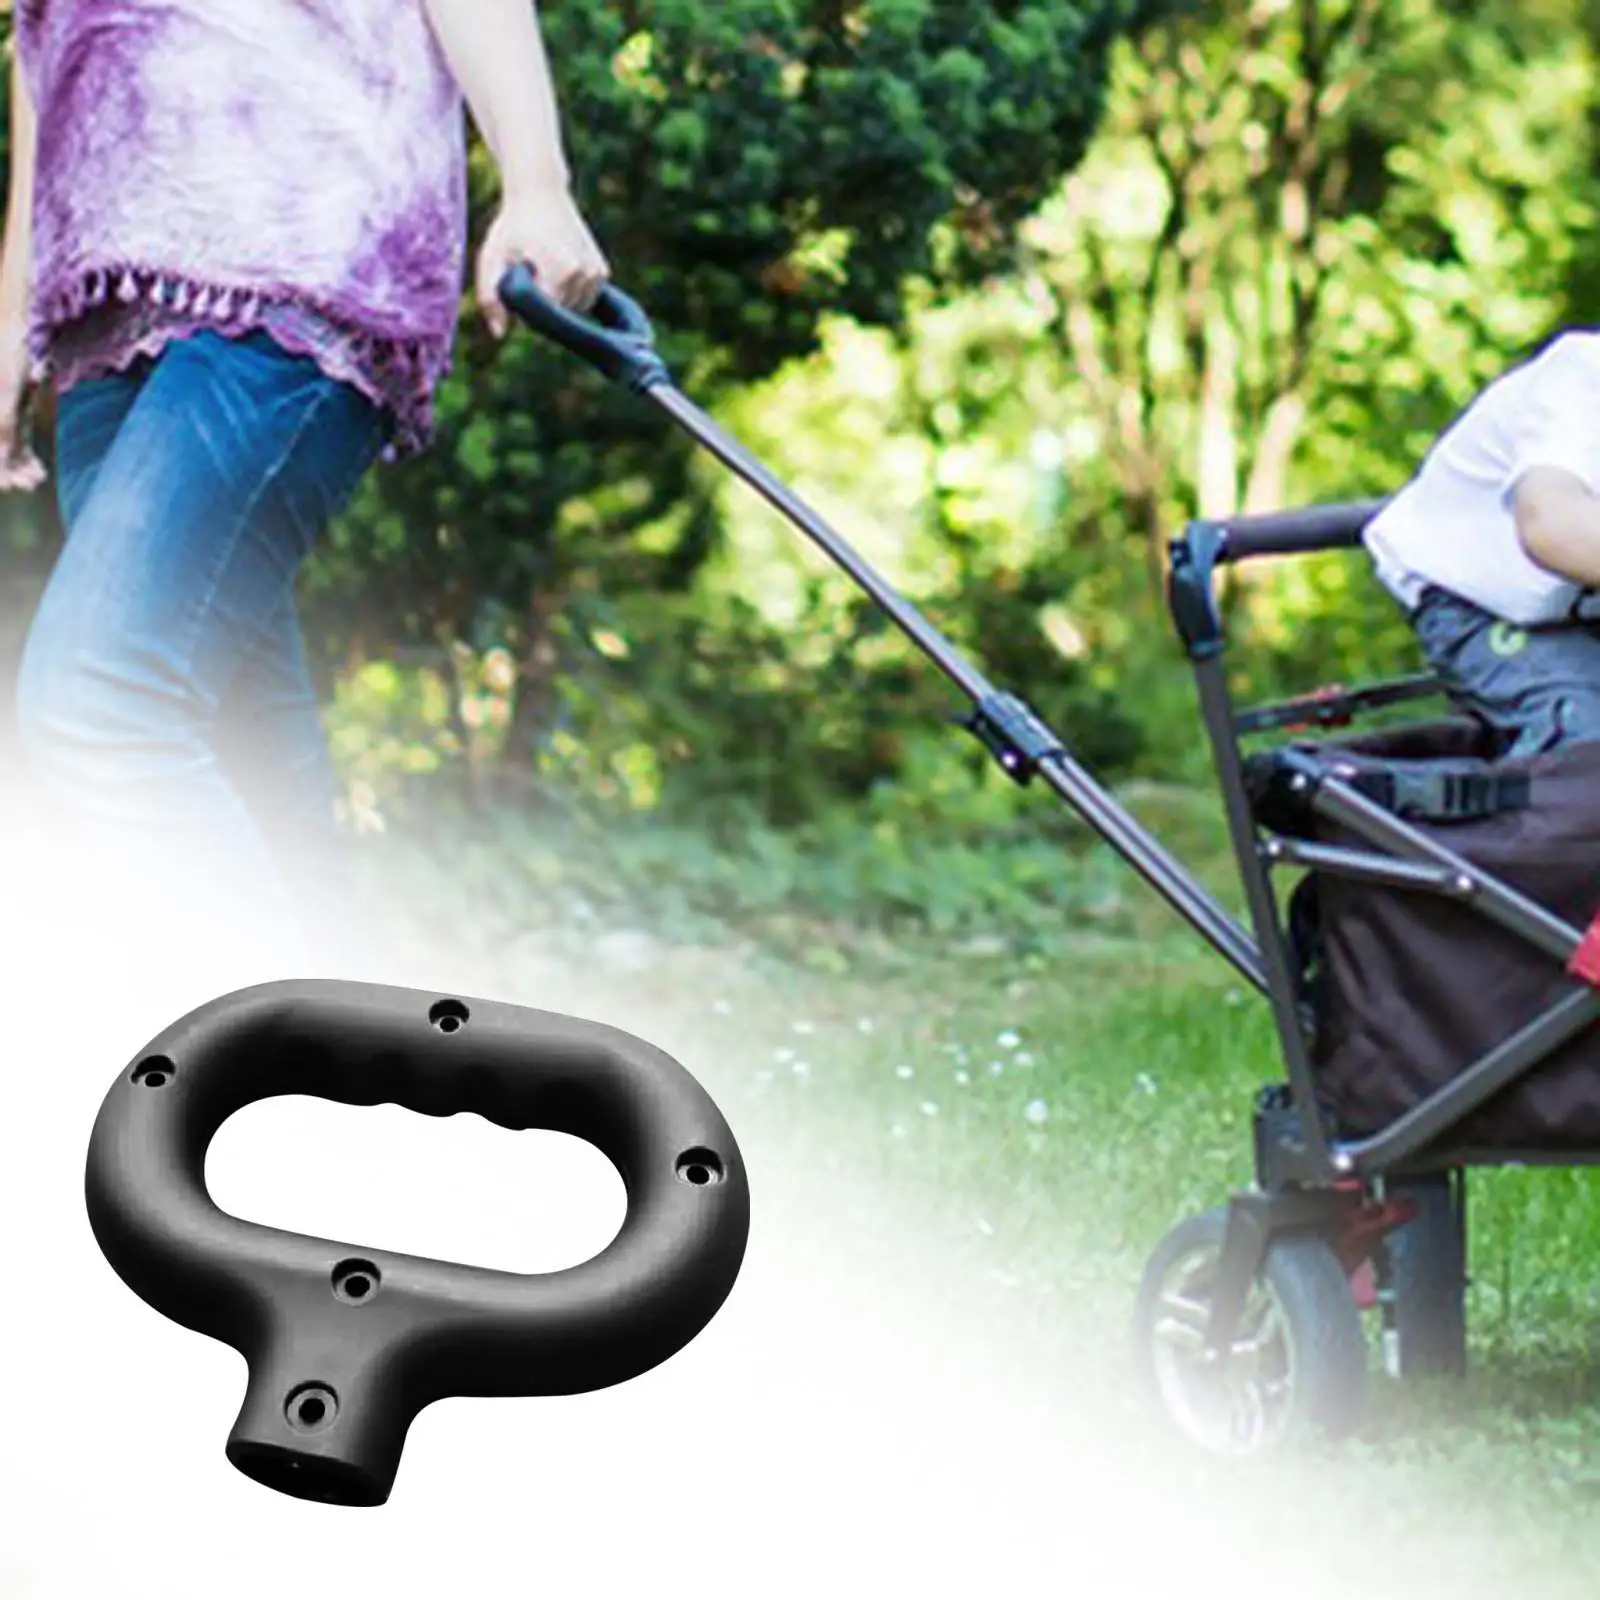 Wagon Cart Push Handle Accessories Hand Truck Handle for Collapsible Wagon Cart Outdoor Shopping Cart Camping Wagon Black